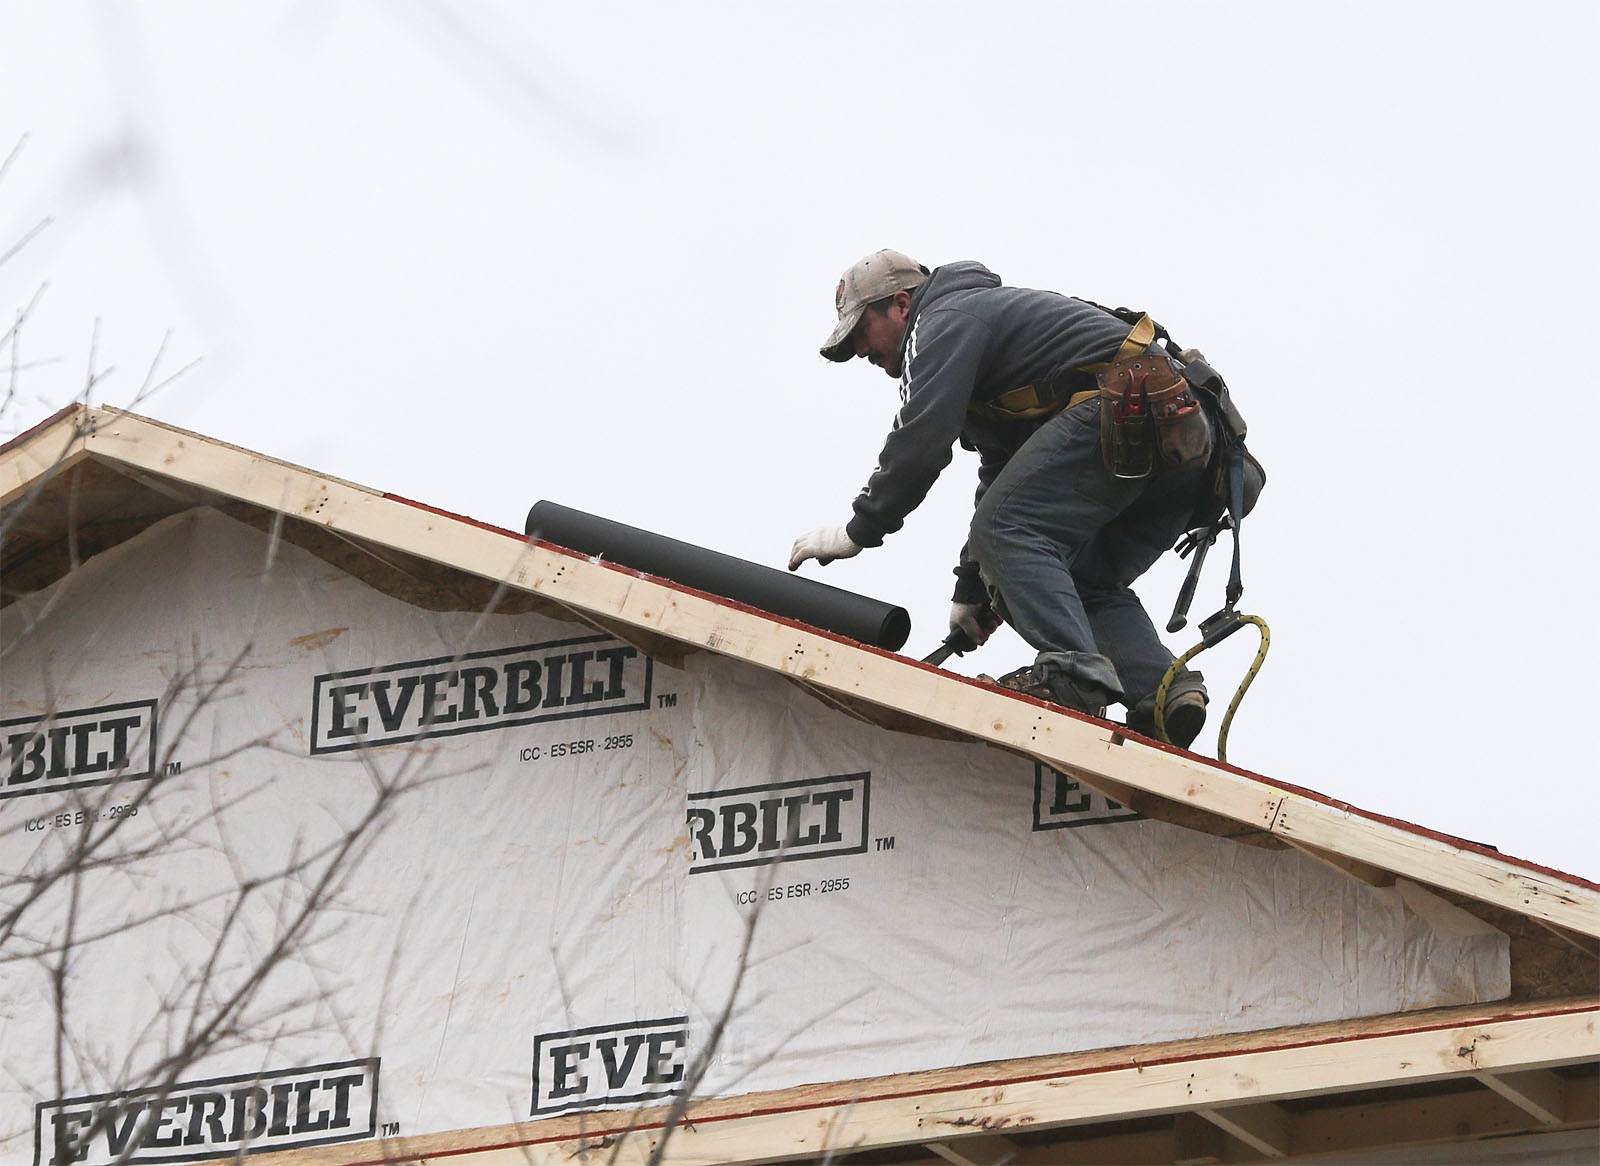 In this Tuesday, Jan. 26, 2016, photo, a man installs a roof on a new home under construction in Atlanta. On Tuesday, Feb. 16, 2016, the National Association of Home Builders/Wells Fargo releases its February index of builder sentiment. (AP Photo/John Bazemore)